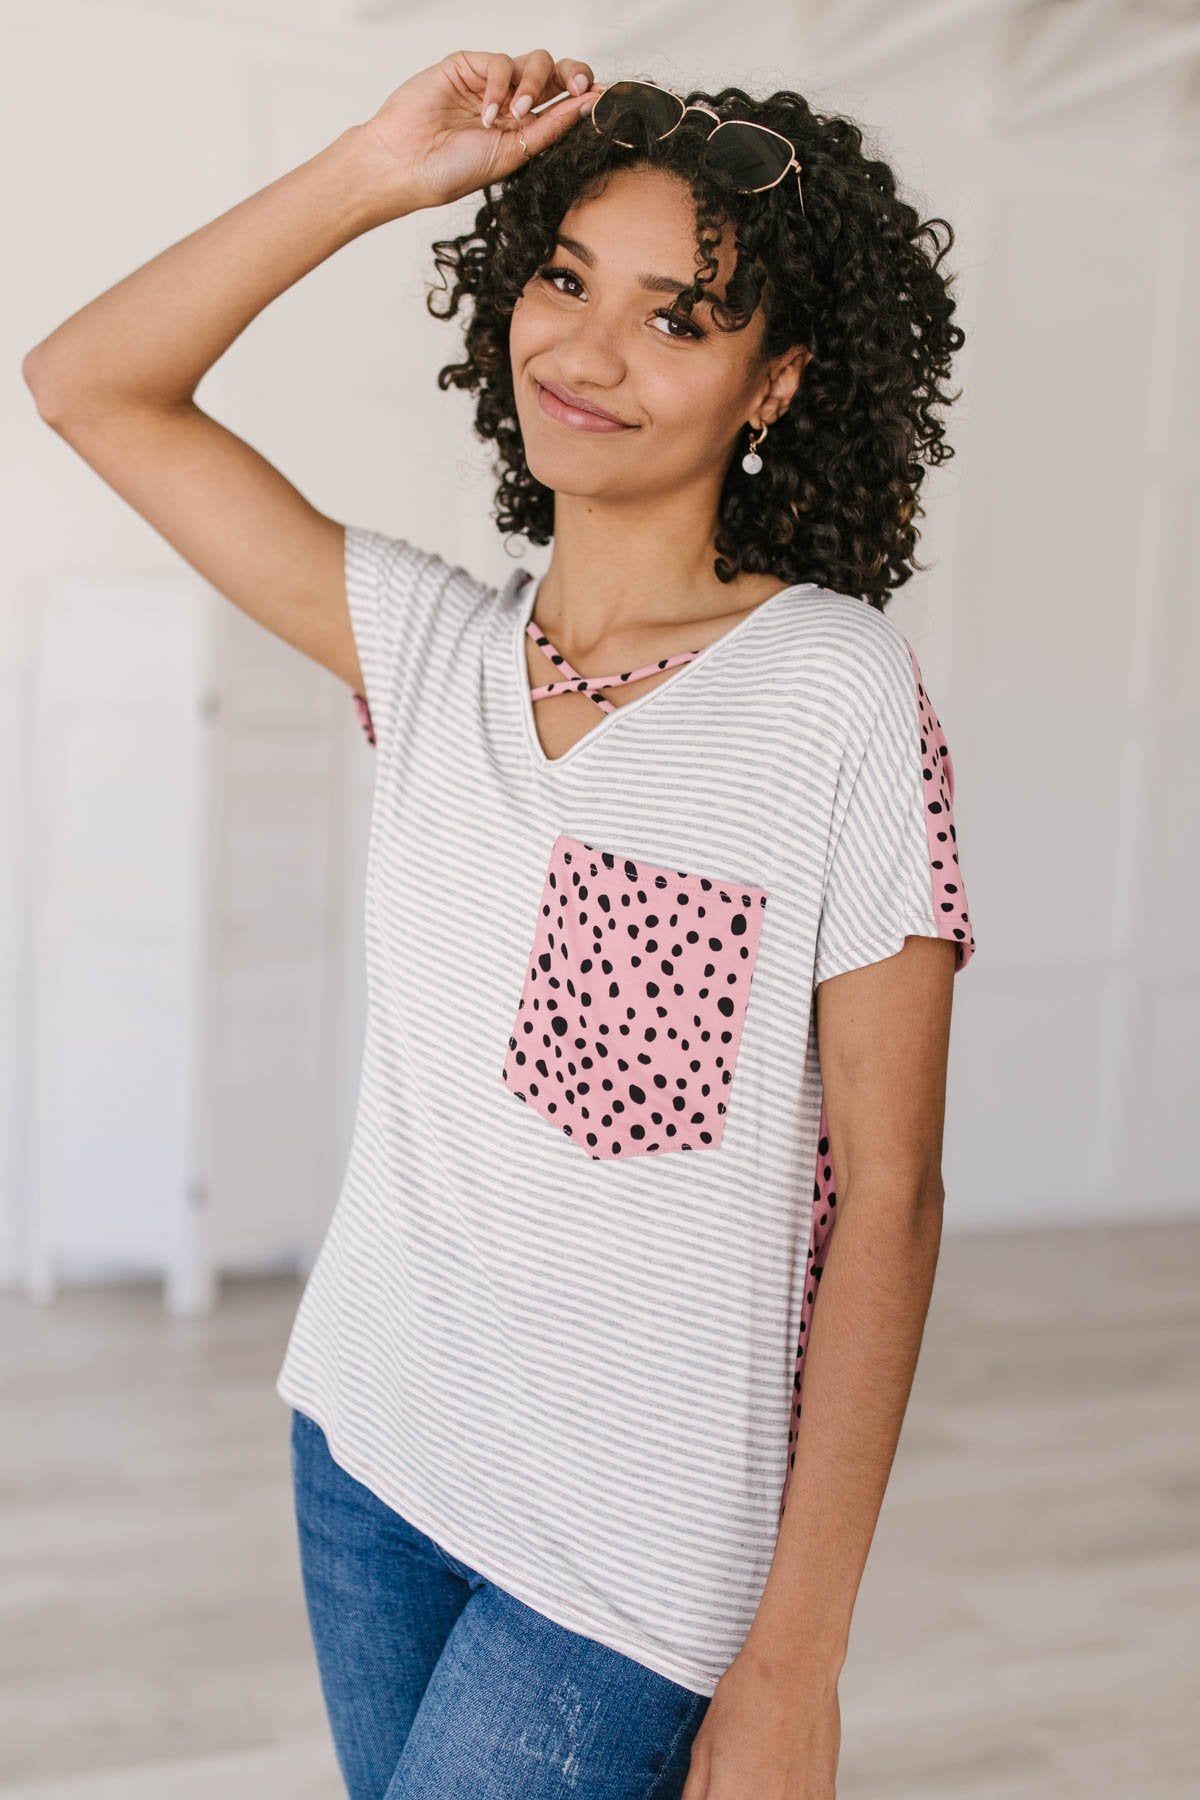 Spotty Connection Top